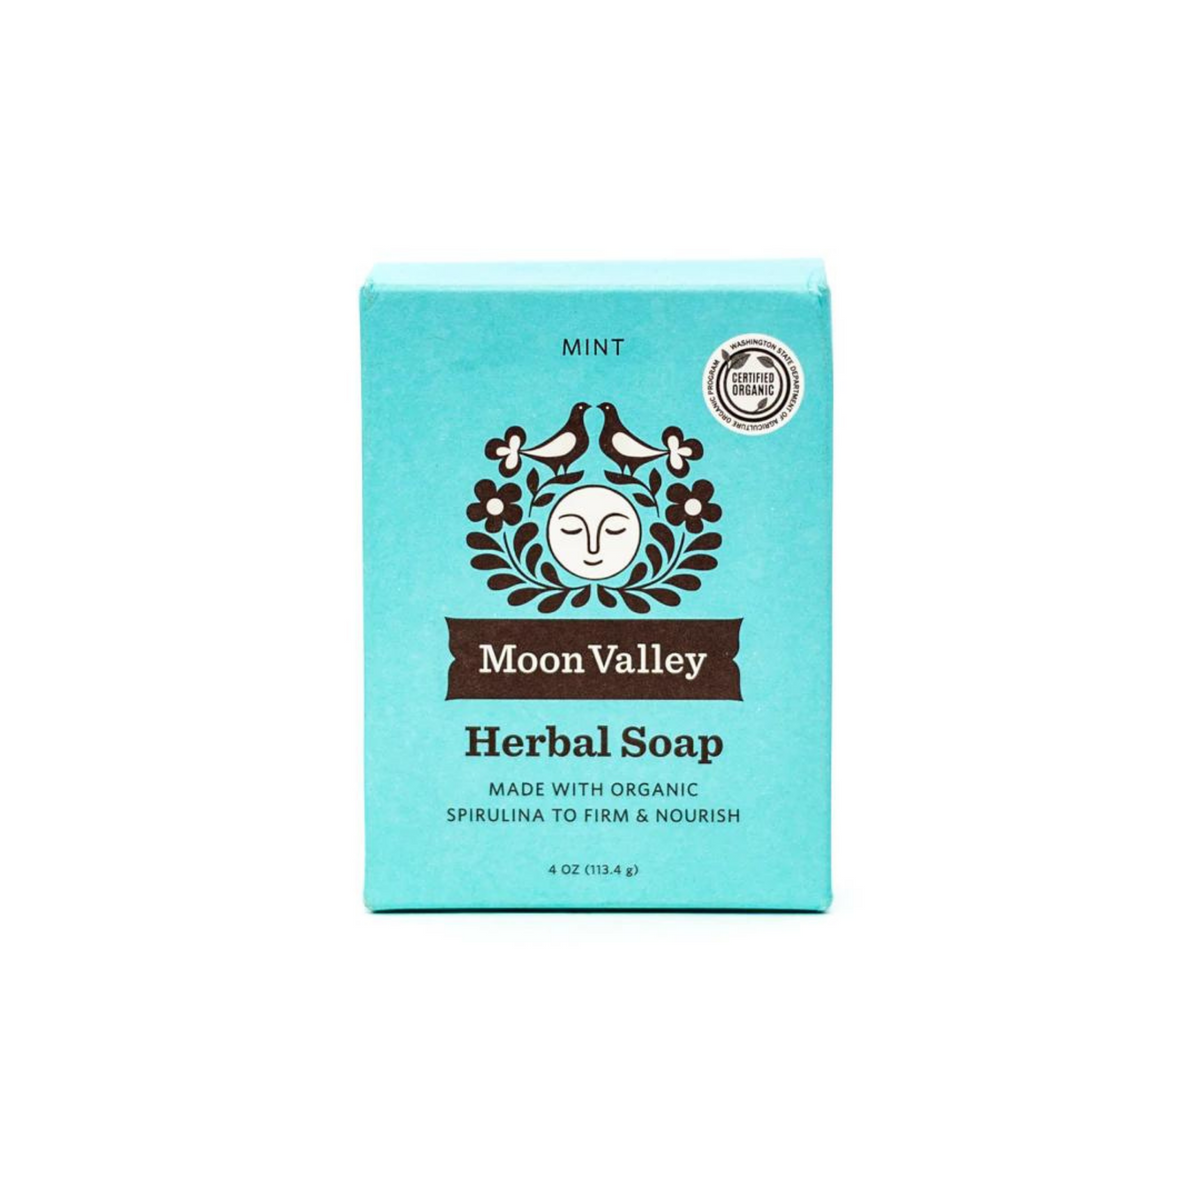 Primary Image of Mint Herbal Soap